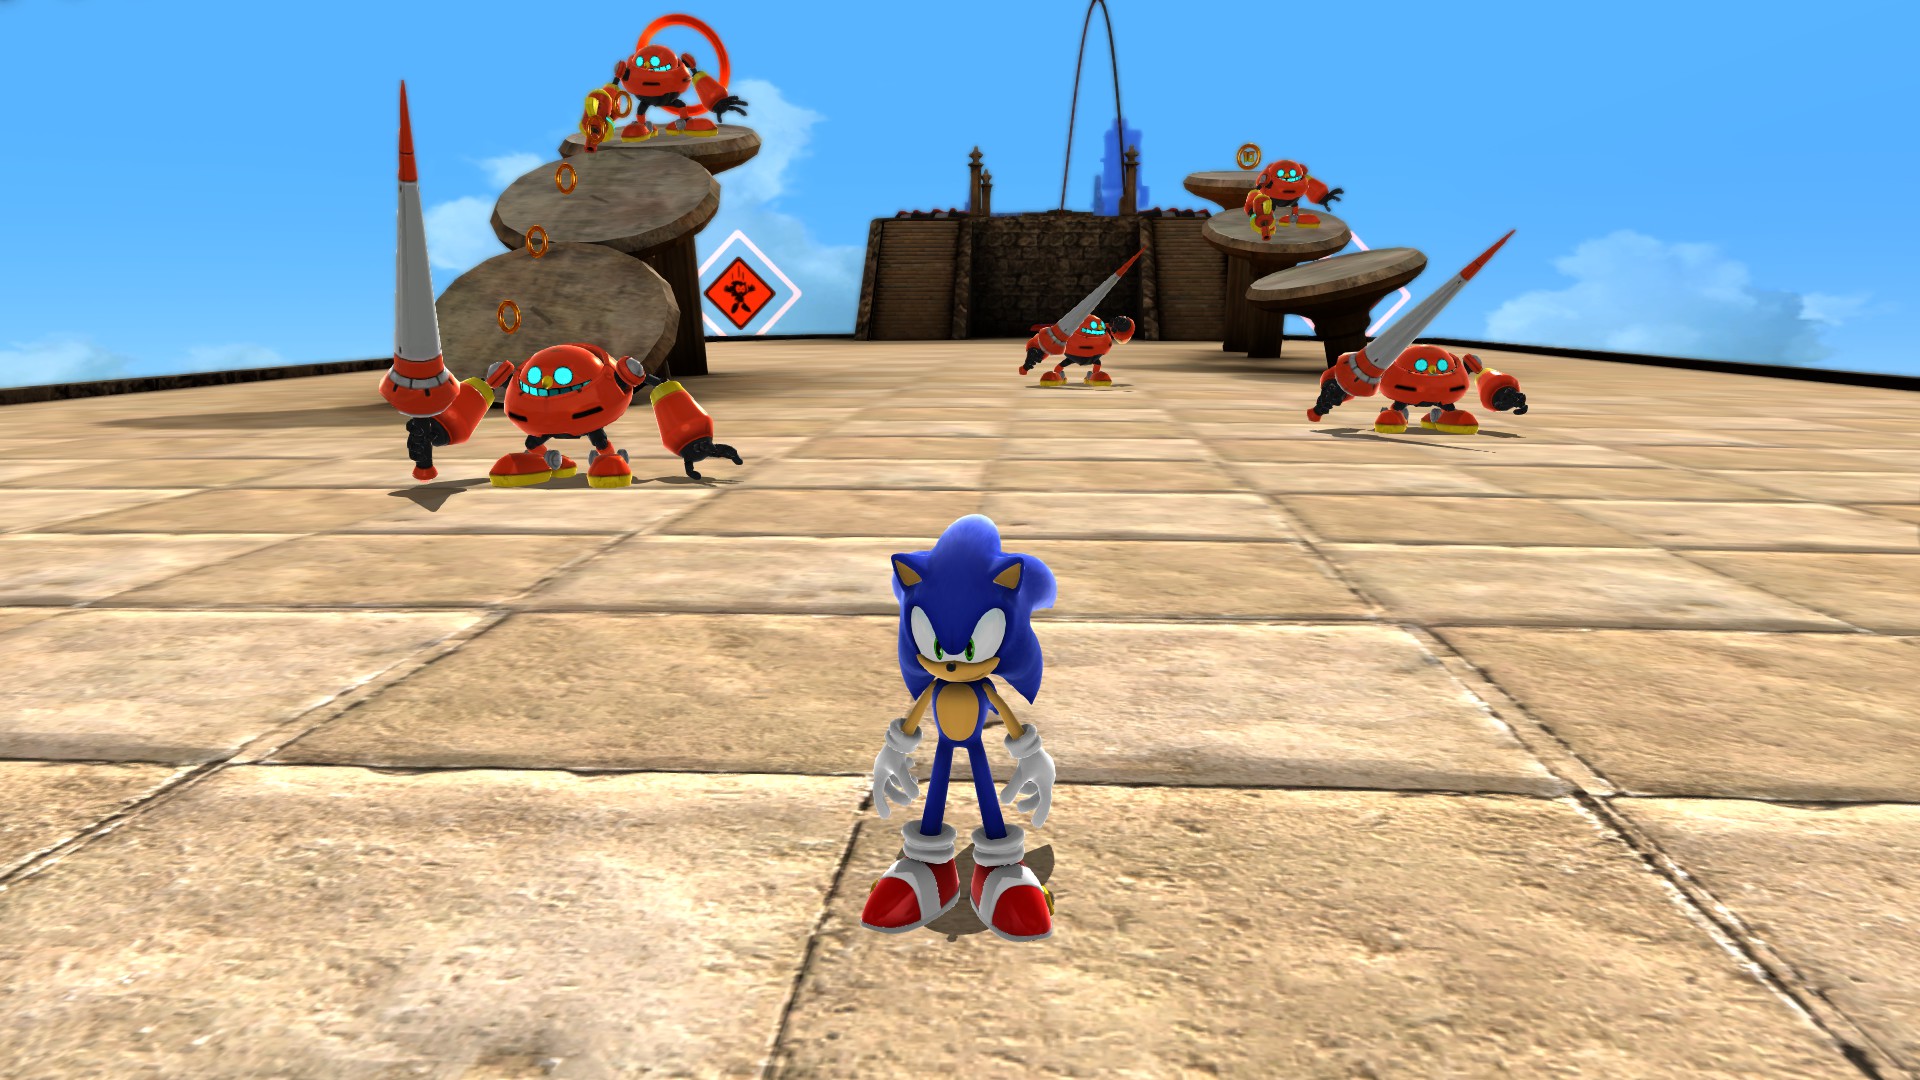 Forces Sonic [Sonic Adventure 2] [Mods]